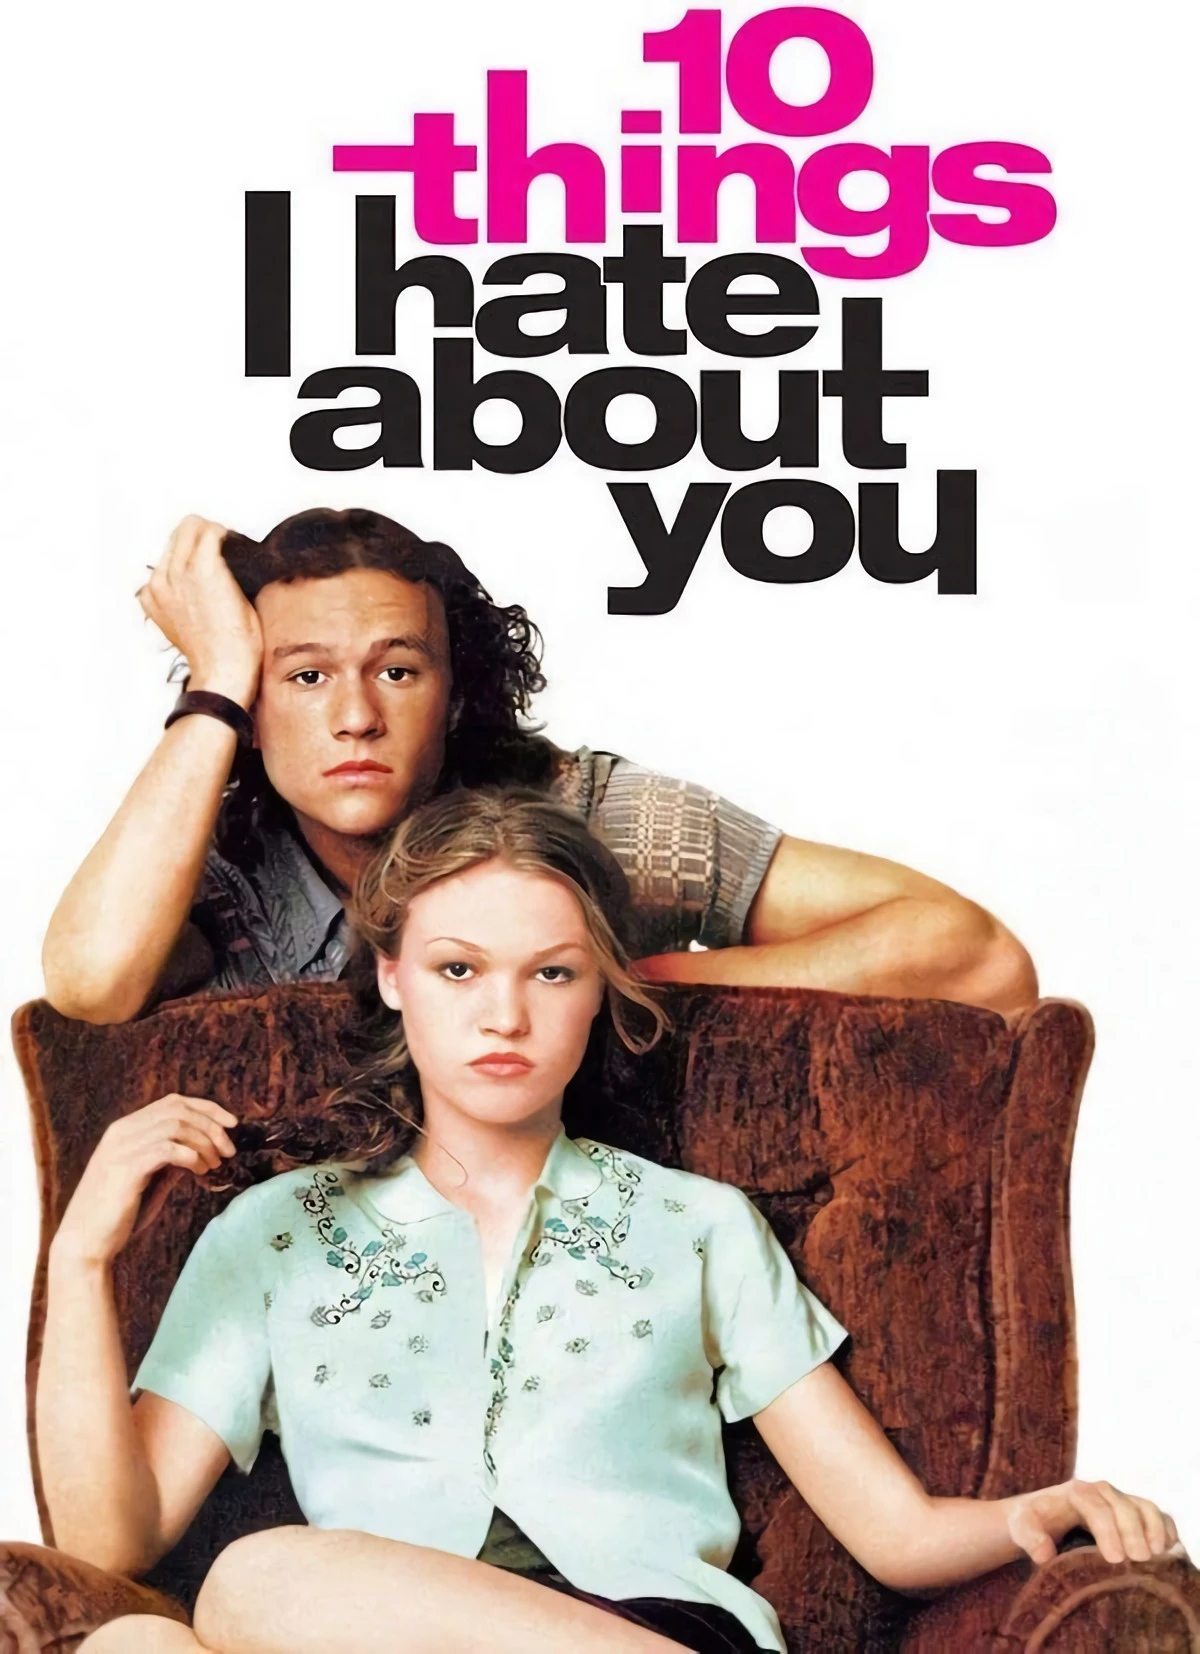 10 things i hate about you poster